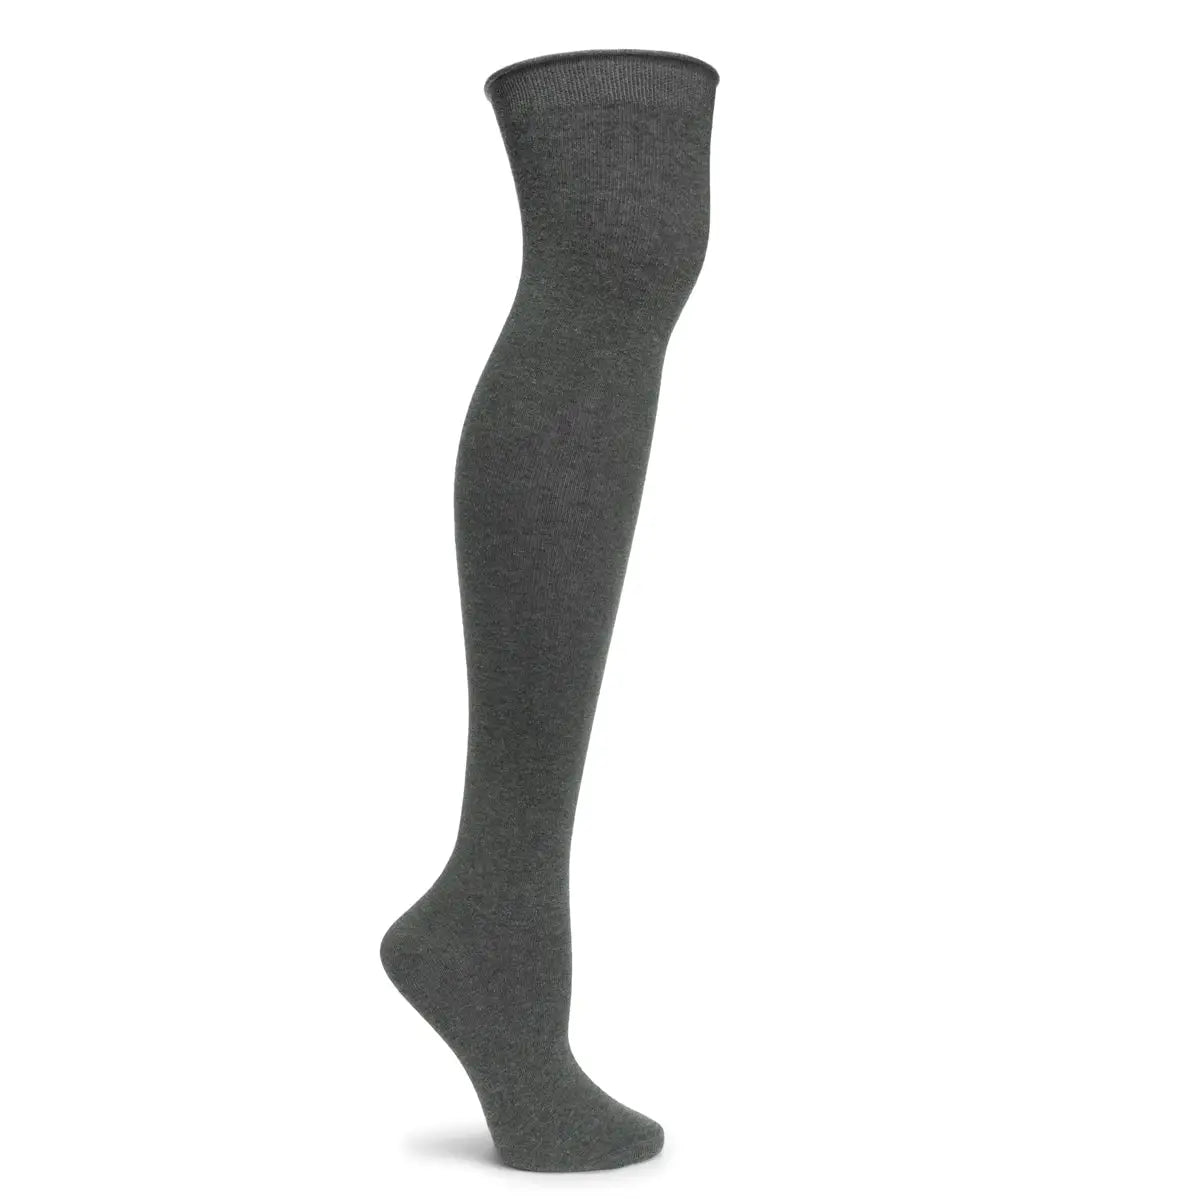 Women's Pima Cotton Knee High Socks with Roll Top in Heather Grey - The Sockery